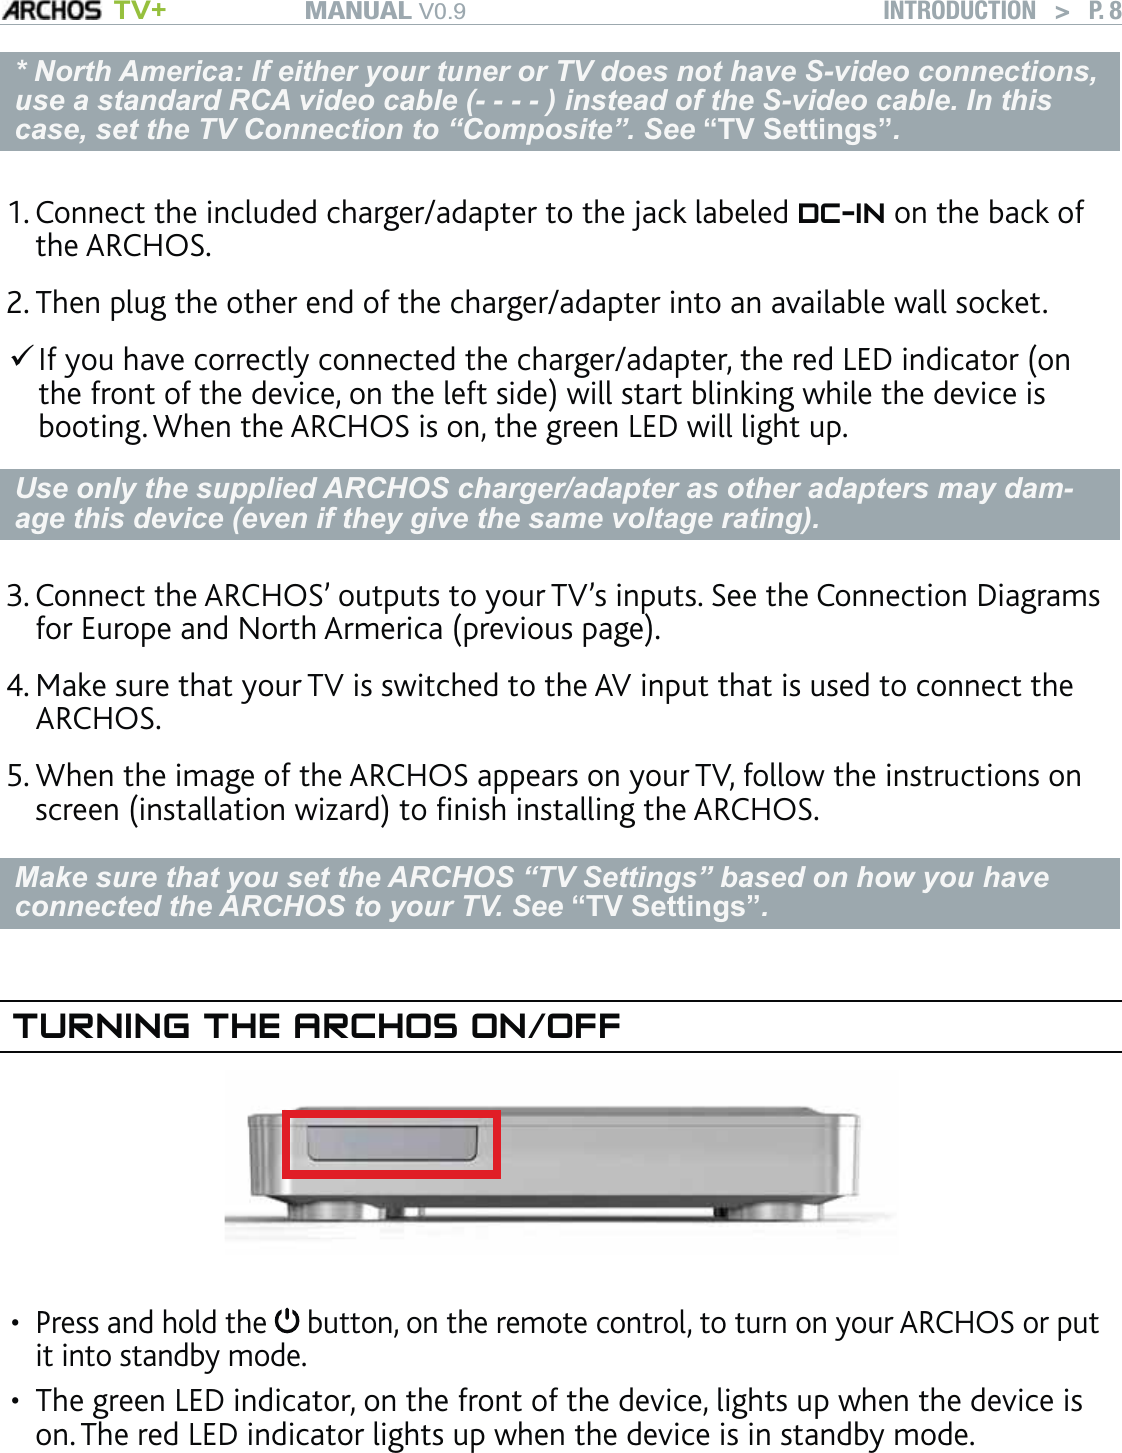 MANUAL V0.9 TV+ INTRODUCTION   &gt;   P. 8* North America: If either your tuner or TV does not have S-video connections, use a standard RCA video cable (- - - - ) instead of the S-video cable. In this case, set the TV Connection to “Composite”. See “TV Settings”.Connect the included charger/adapter to the jack labeled DC-IN on the back of the ARCHOS. Then plug the other end of the charger/adapter into an available wall socket. If you have correctly connected the charger/adapter, the red LED indicator (on the front of the device, on the left side) will start blinking while the device is booting. When the ARCHOS is on, the green LED will light up.Use only the supplied ARCHOS charger/adapter as other adapters may dam-age this device (even if they give the same voltage rating).Connect the ARCHOS’ outputs to your TV’s inputs. See the Connection Diagrams for Europe and North Armerica (previous page).Make sure that your TV is switched to the AV input that is used to connect the ARCHOS.When the image of the ARCHOS appears on your TV, follow the instructions on screen (installation wizard) to ﬁnish installing the ARCHOS.Make sure that you set the ARCHOS “TV Settings” based on how you have connected the ARCHOS to your TV. See “TV Settings”. TURNING THE ARCHOS ON/OFFPress and hold the   button, on the remote control, to turn on your ARCHOS or put it into standby mode.The green LED indicator, on the front of the device, lights up when the device is on. The red LED indicator lights up when the device is in standby mode. 1.2.3.4.5.••